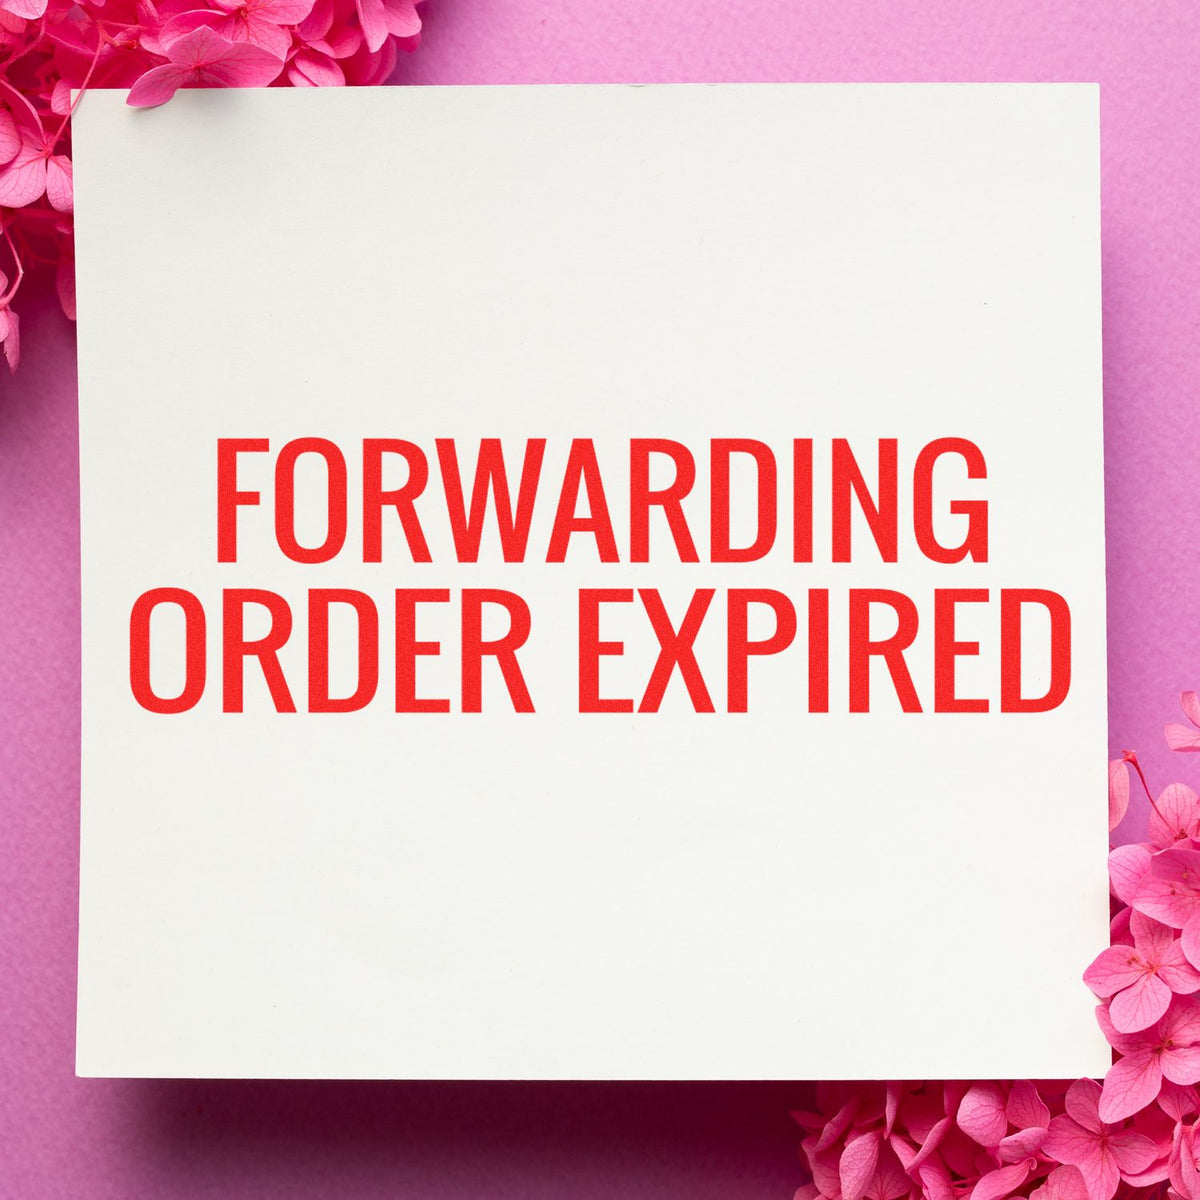 Large Forwarding Order Expiring Rubber Stamp In Use Photo